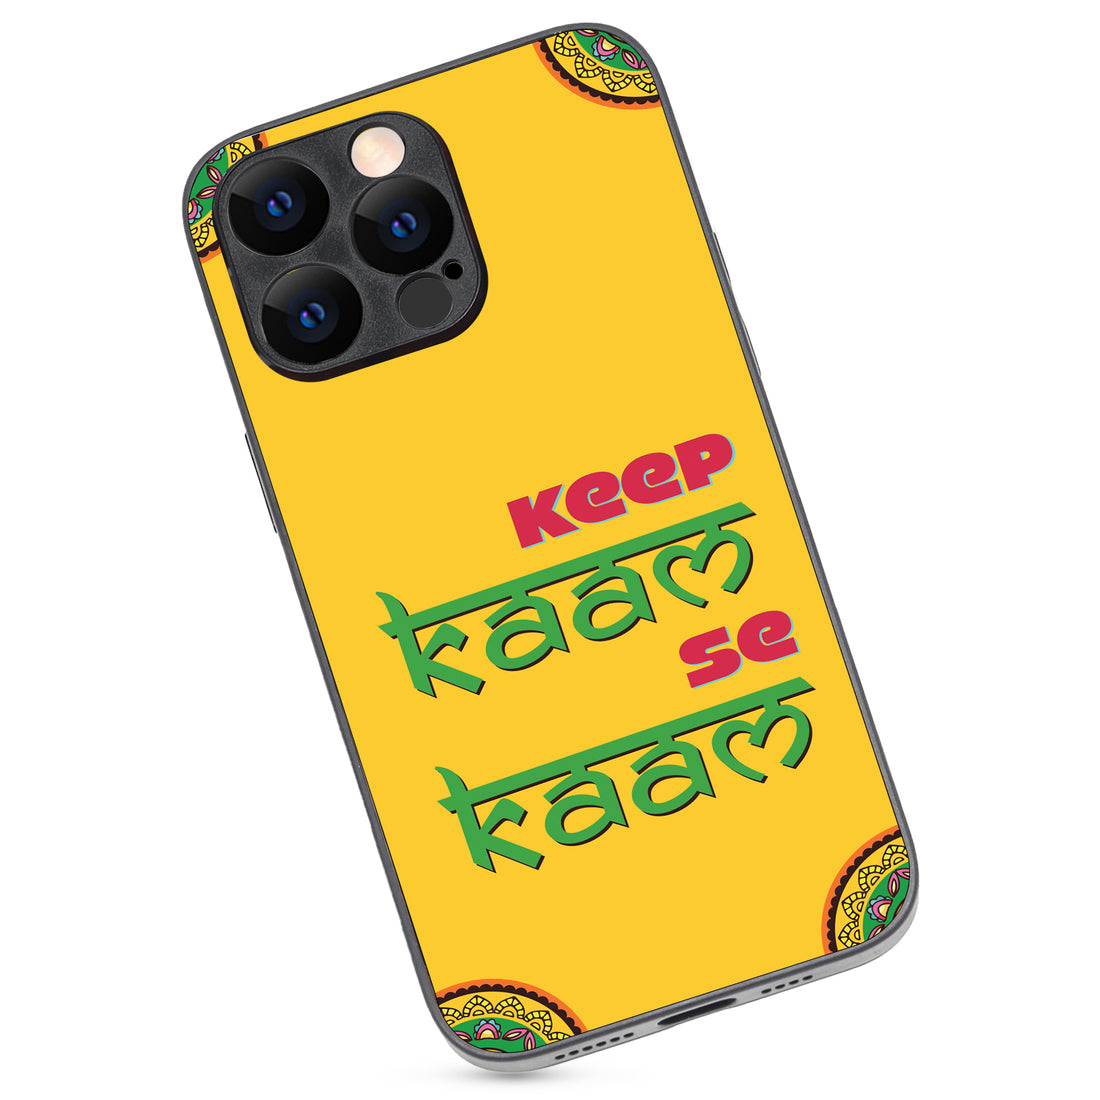 Keep Kaam Motivational Quotes iPhone 14 Pro Max Case